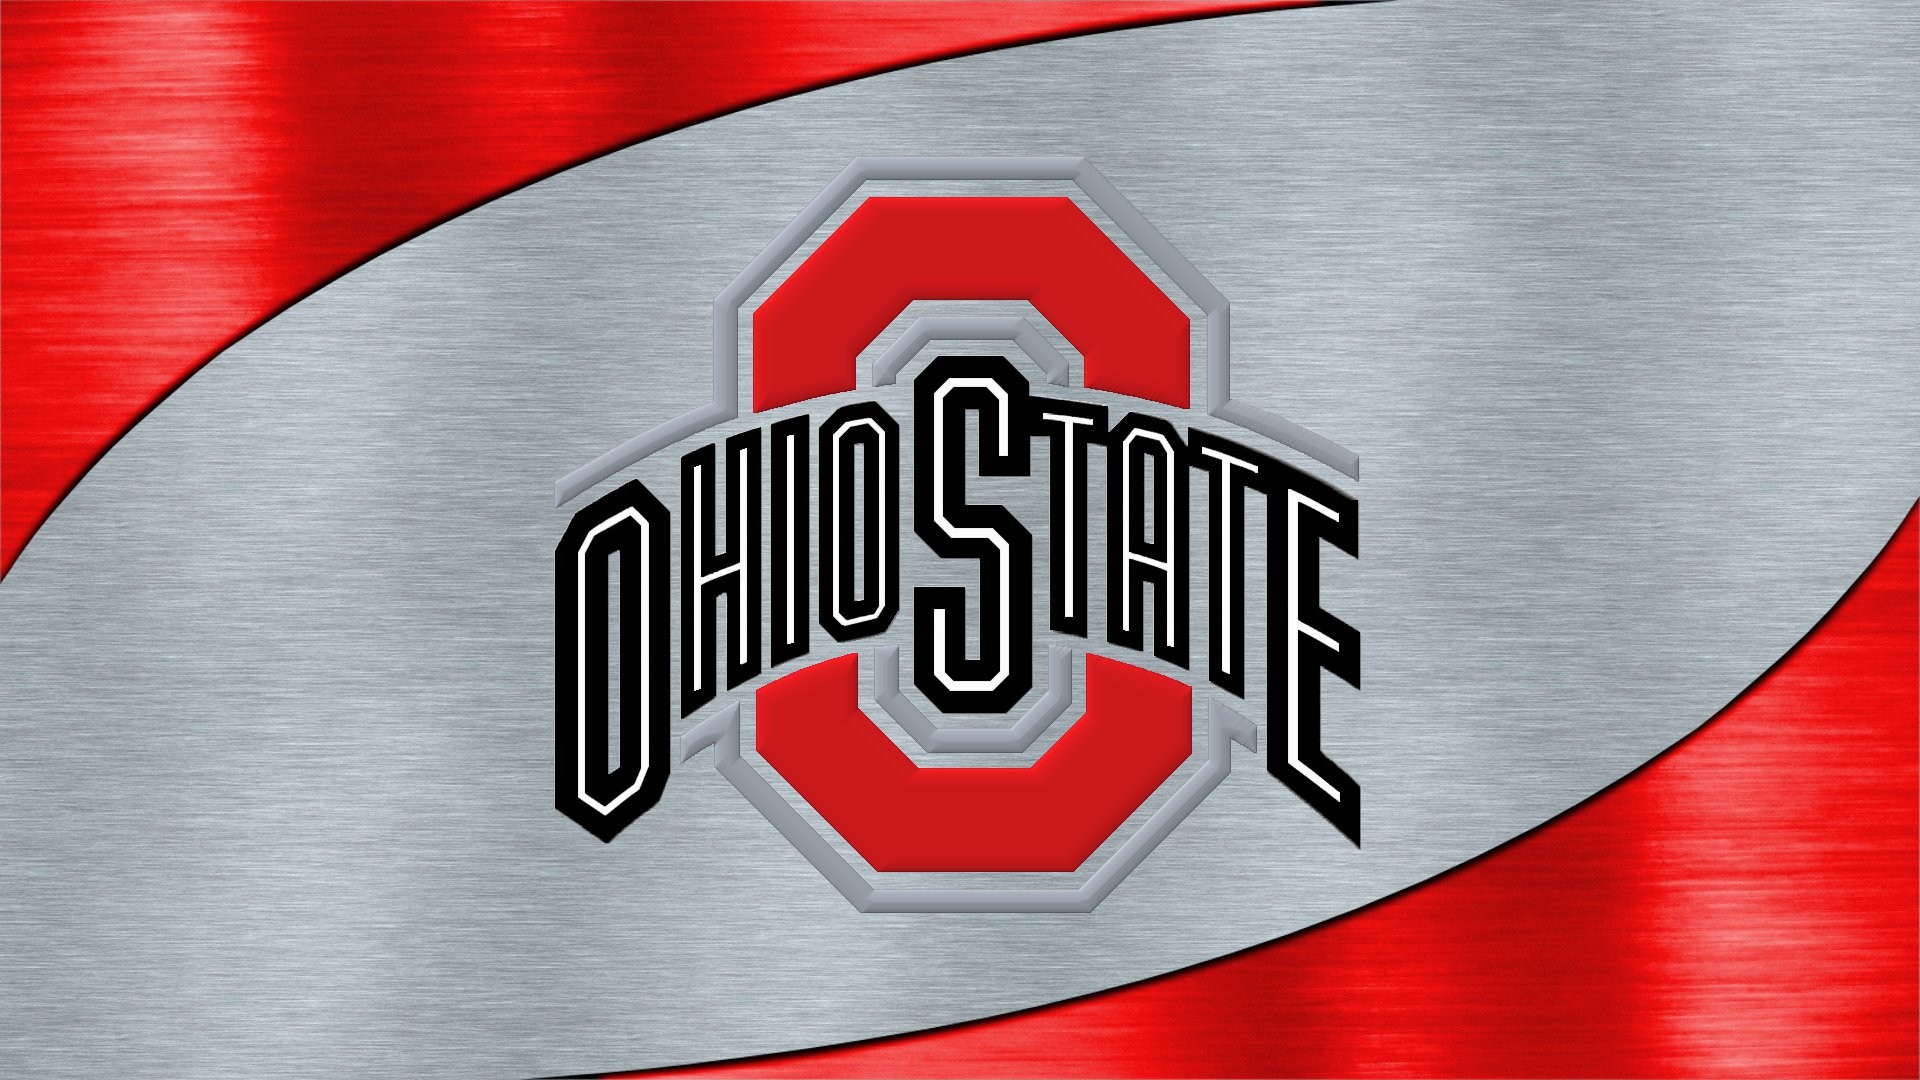 1920x1080 Ohio State Background Page 1